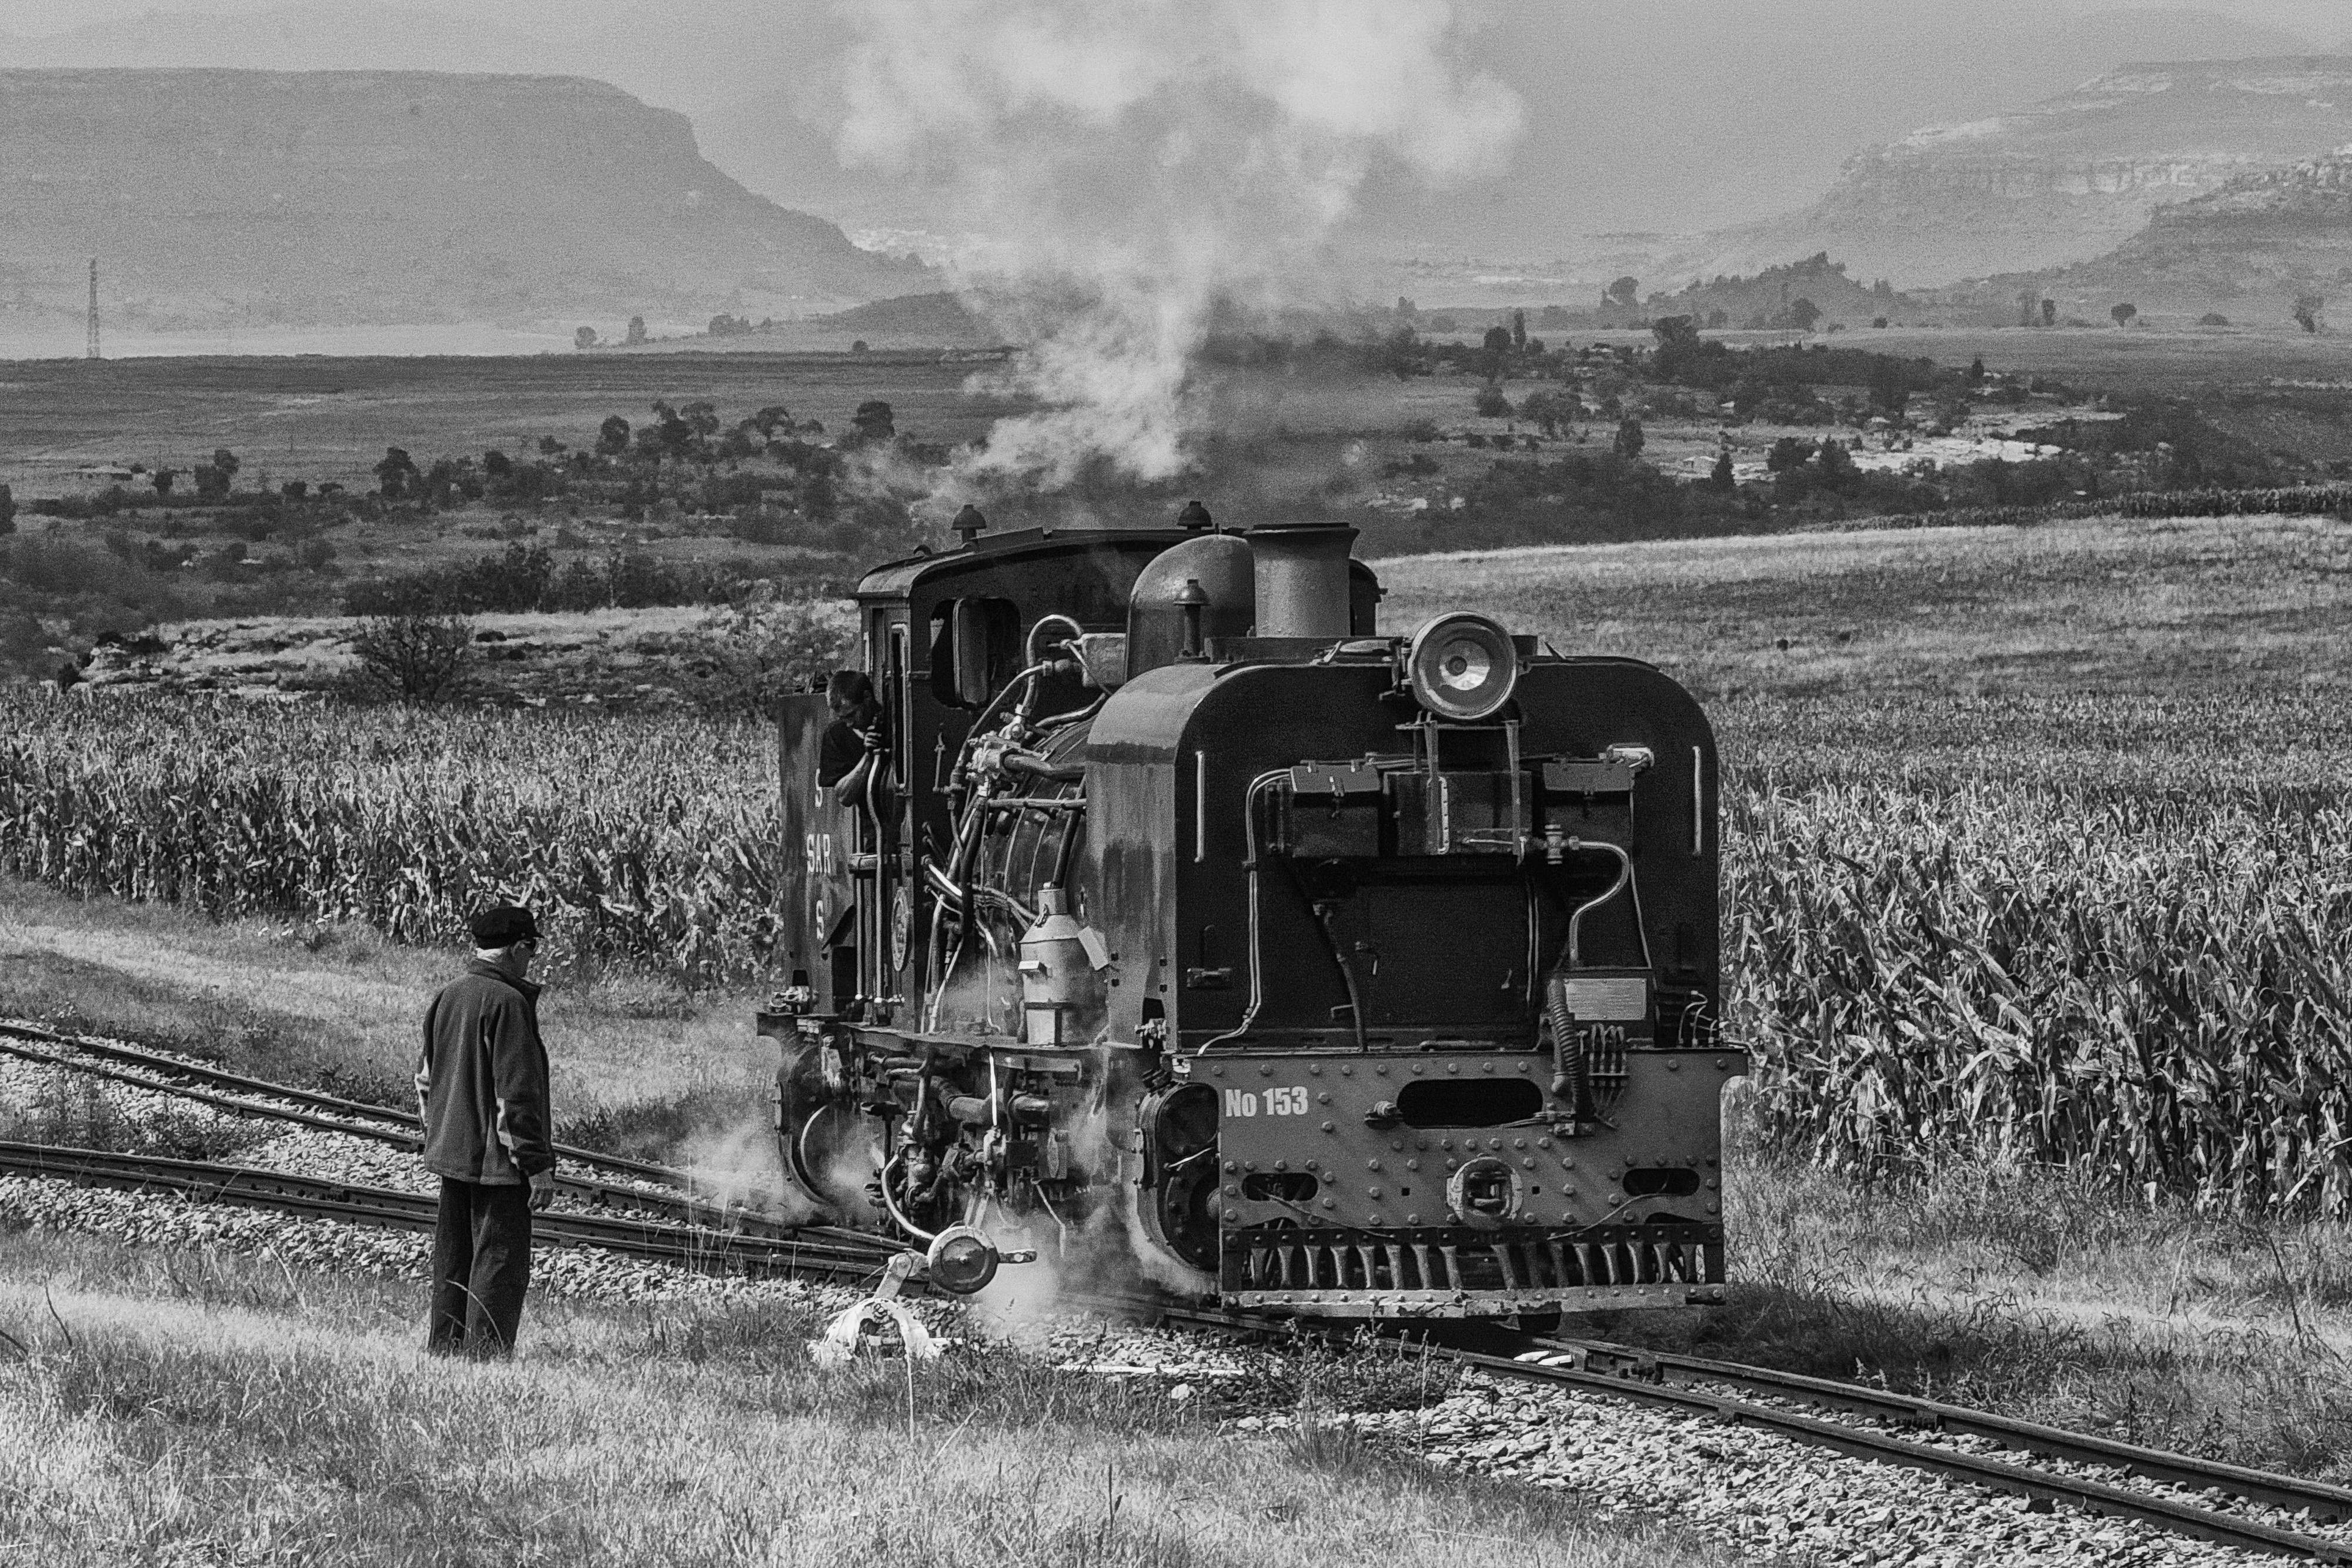 An old guy admiring an old steam train in action – a perfect pairing. Image: Chris Marais